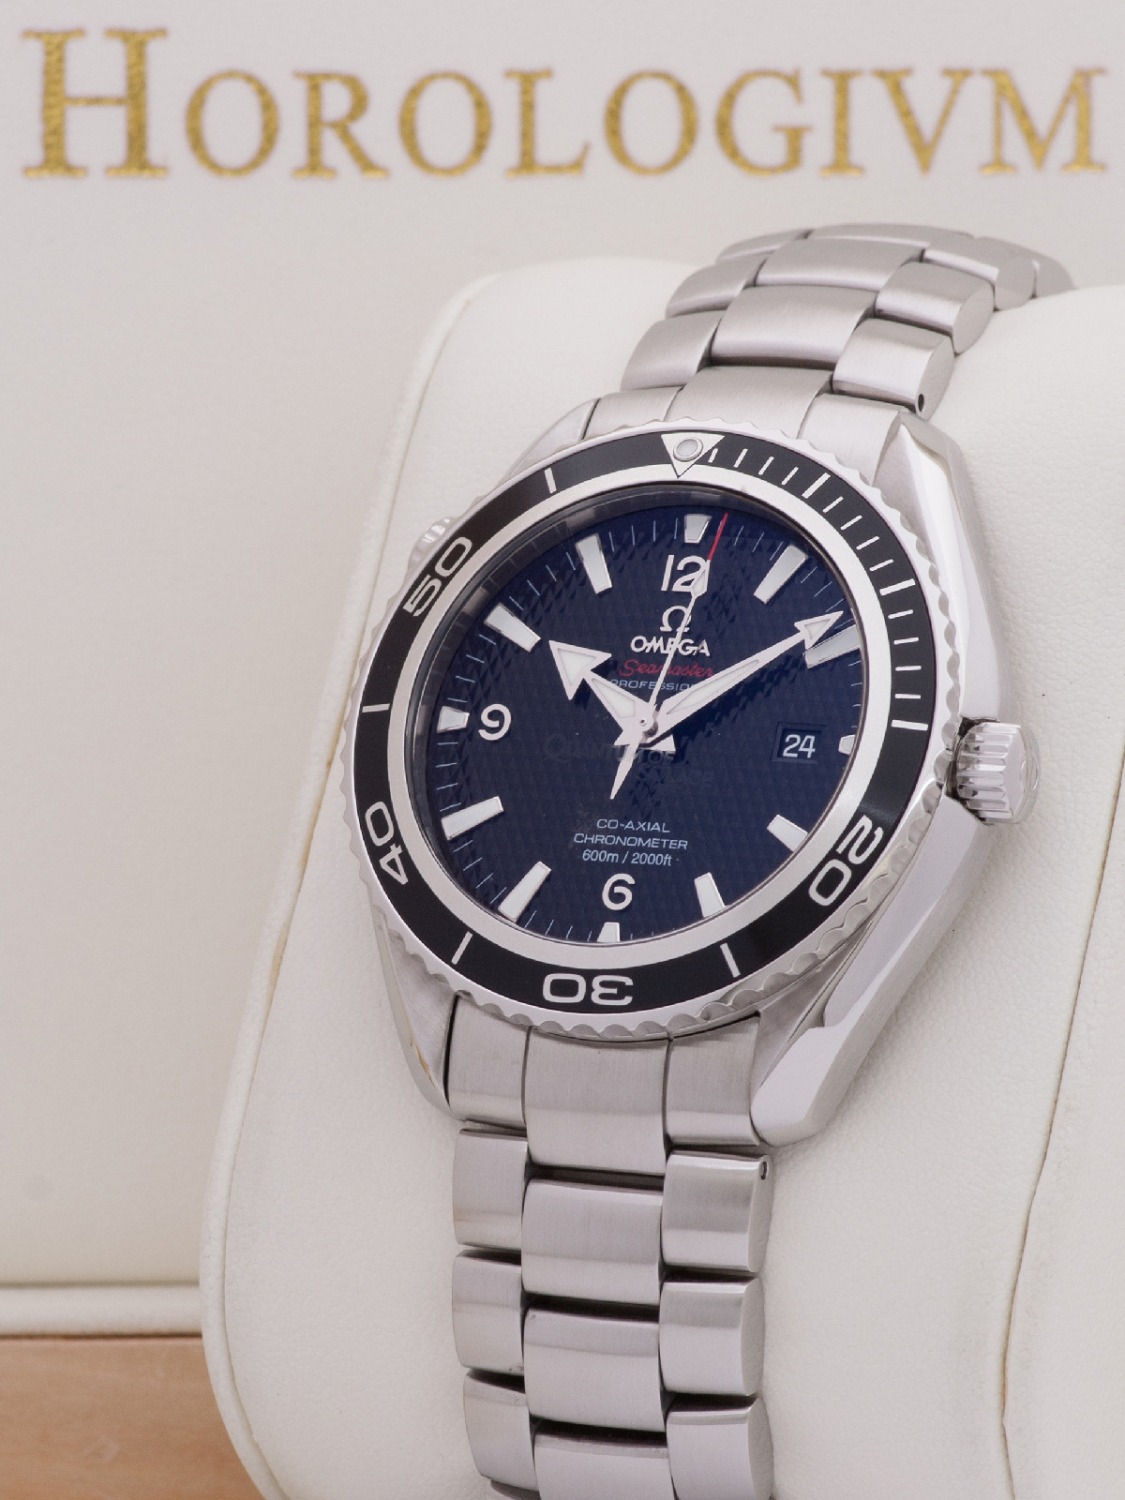 Omega Seamaster Planet Ocean 007 Quantum of Solace LE 5007PCS watch, silver